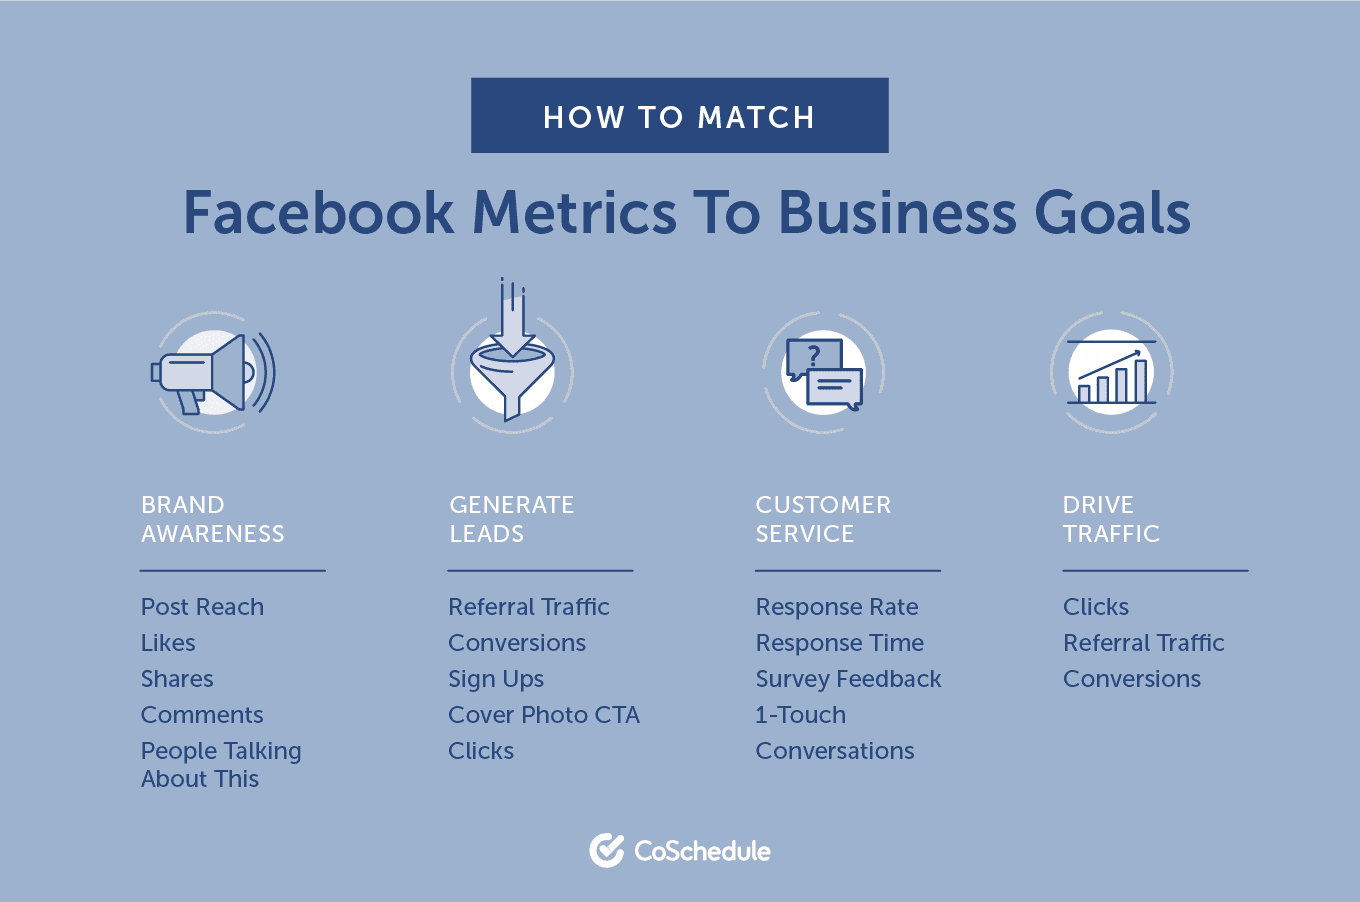 How to match Facebook Metrics to Business Goals: Brand awareness, generate leads, customer service, drive traffic